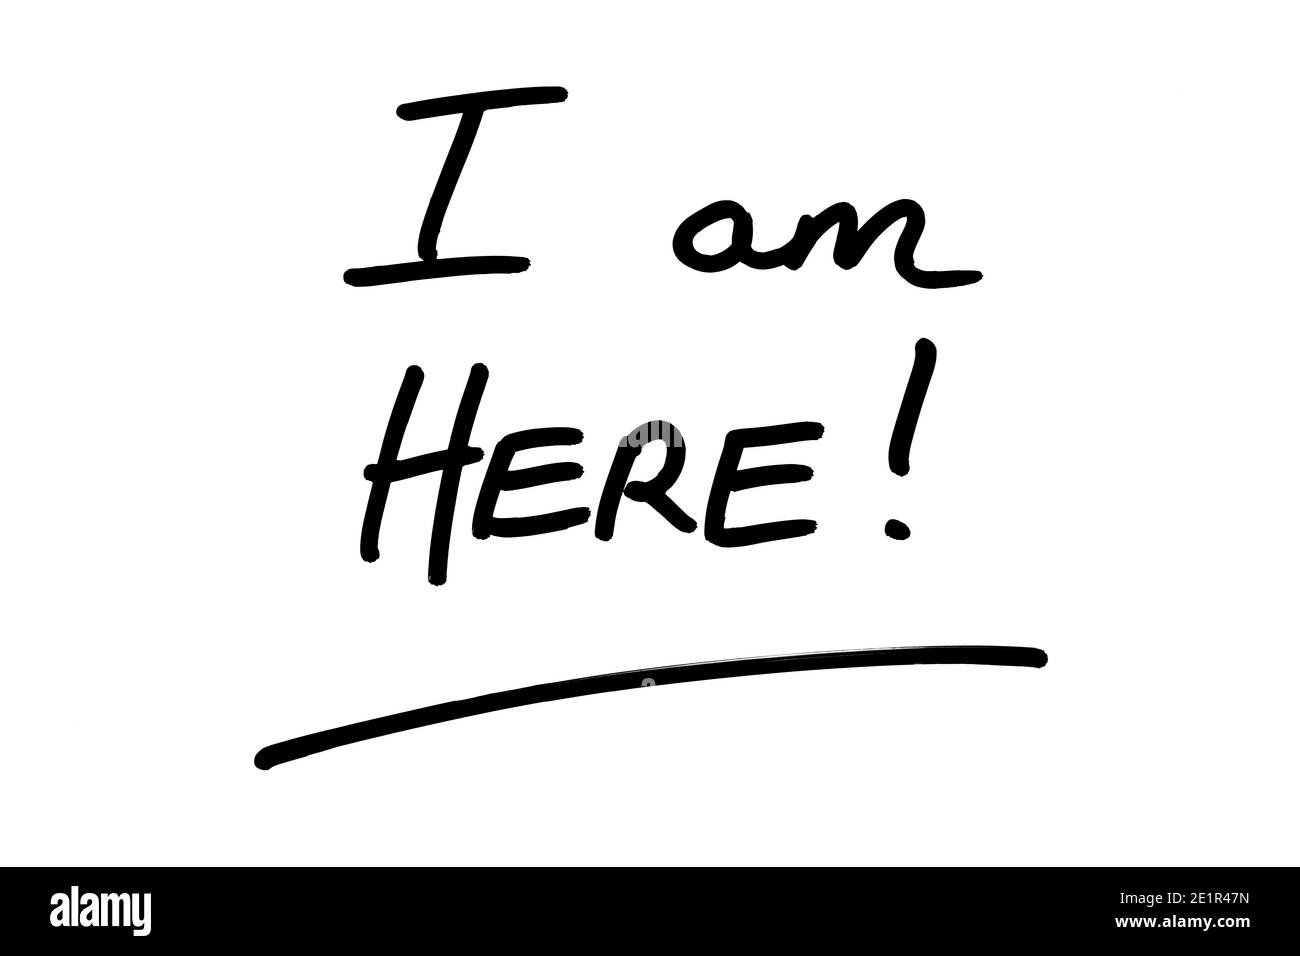 I am HERE! handwritten on a white background. Stock Photo